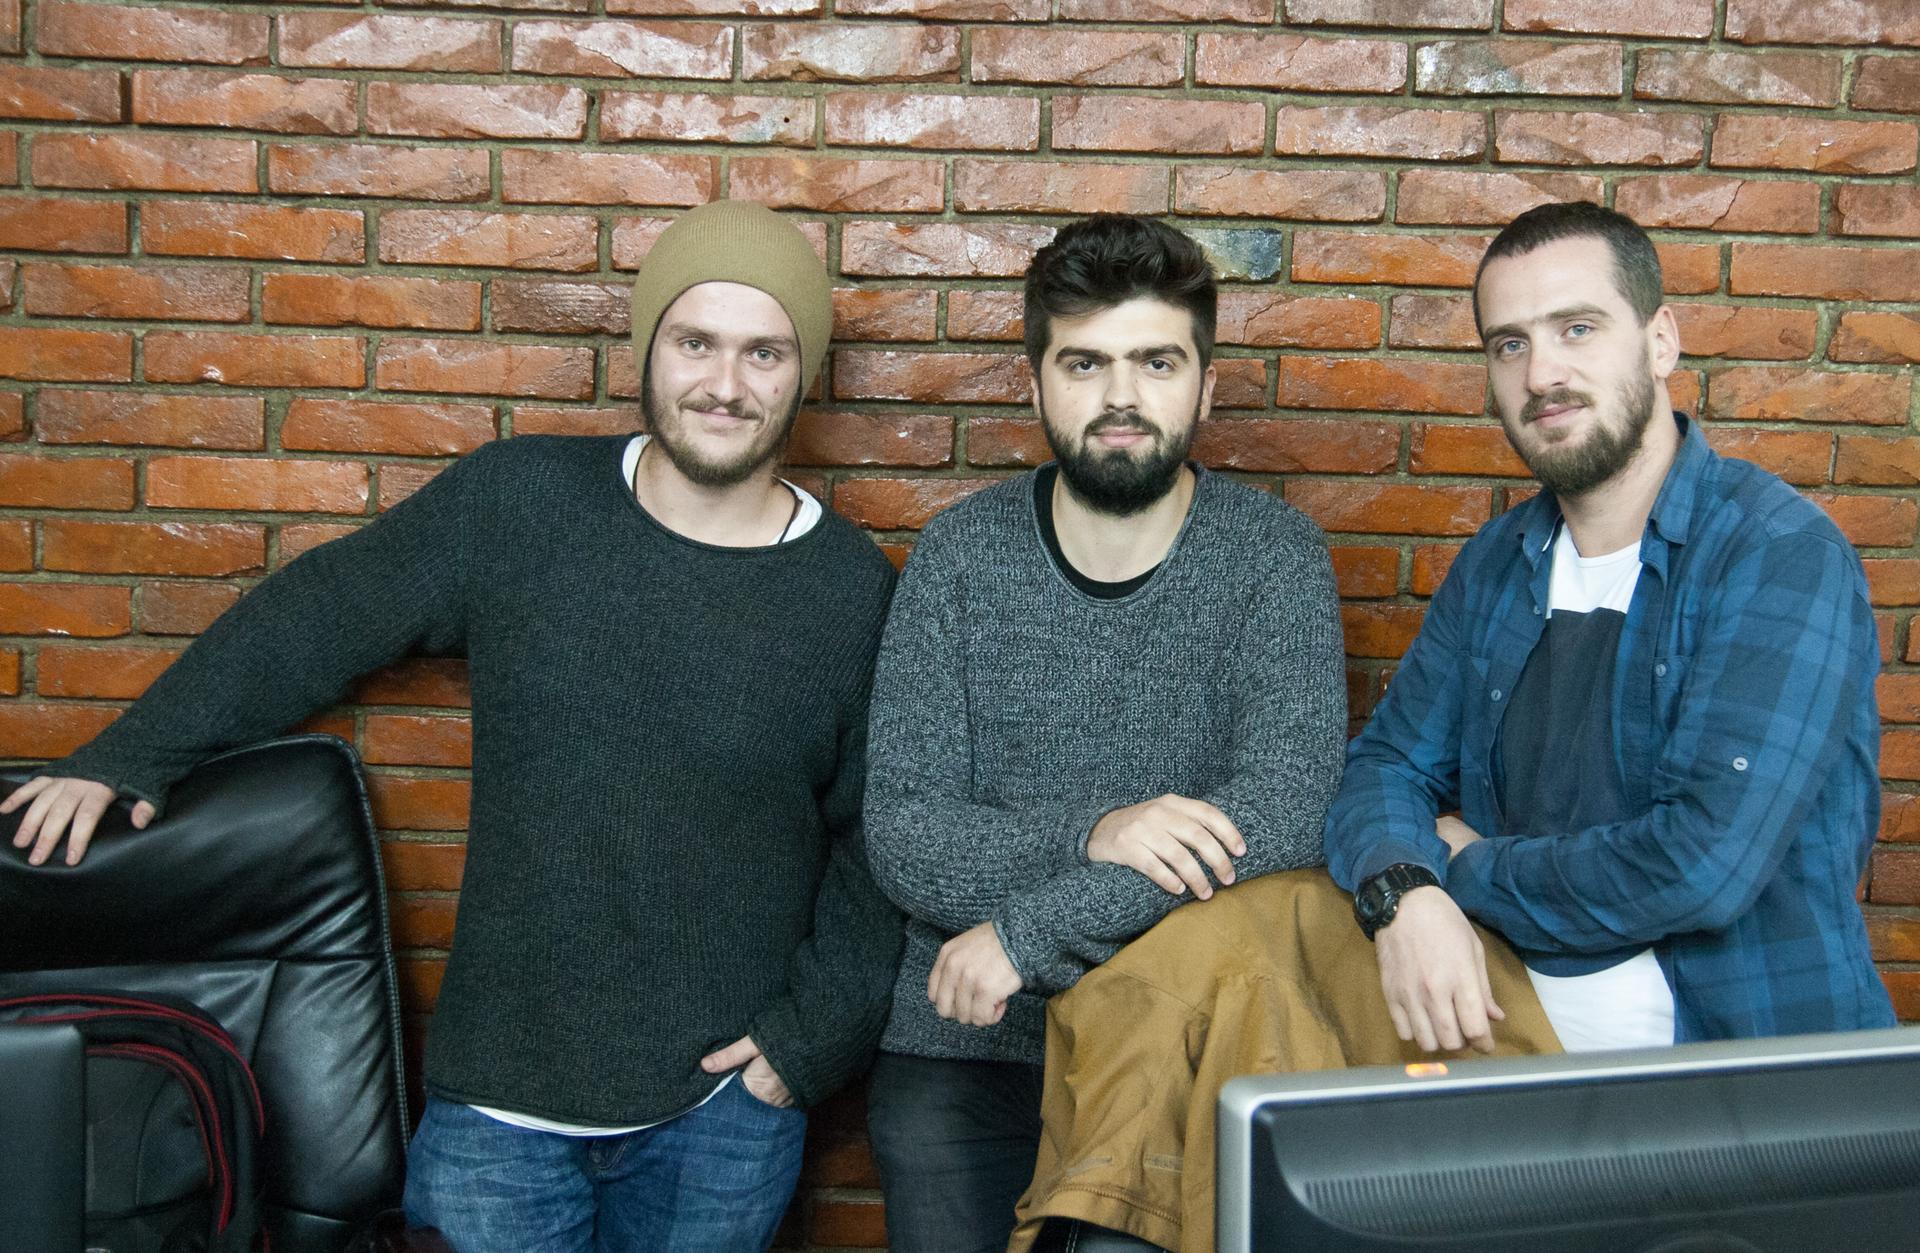 The team behind "Kosovo if Trump Wins" (from left) Fitim Krasniqi, Argjend Haxhiu and Kushtrim Krasniqi. All three are devout Muslims. They are also pro-American like most people in Kosovo.